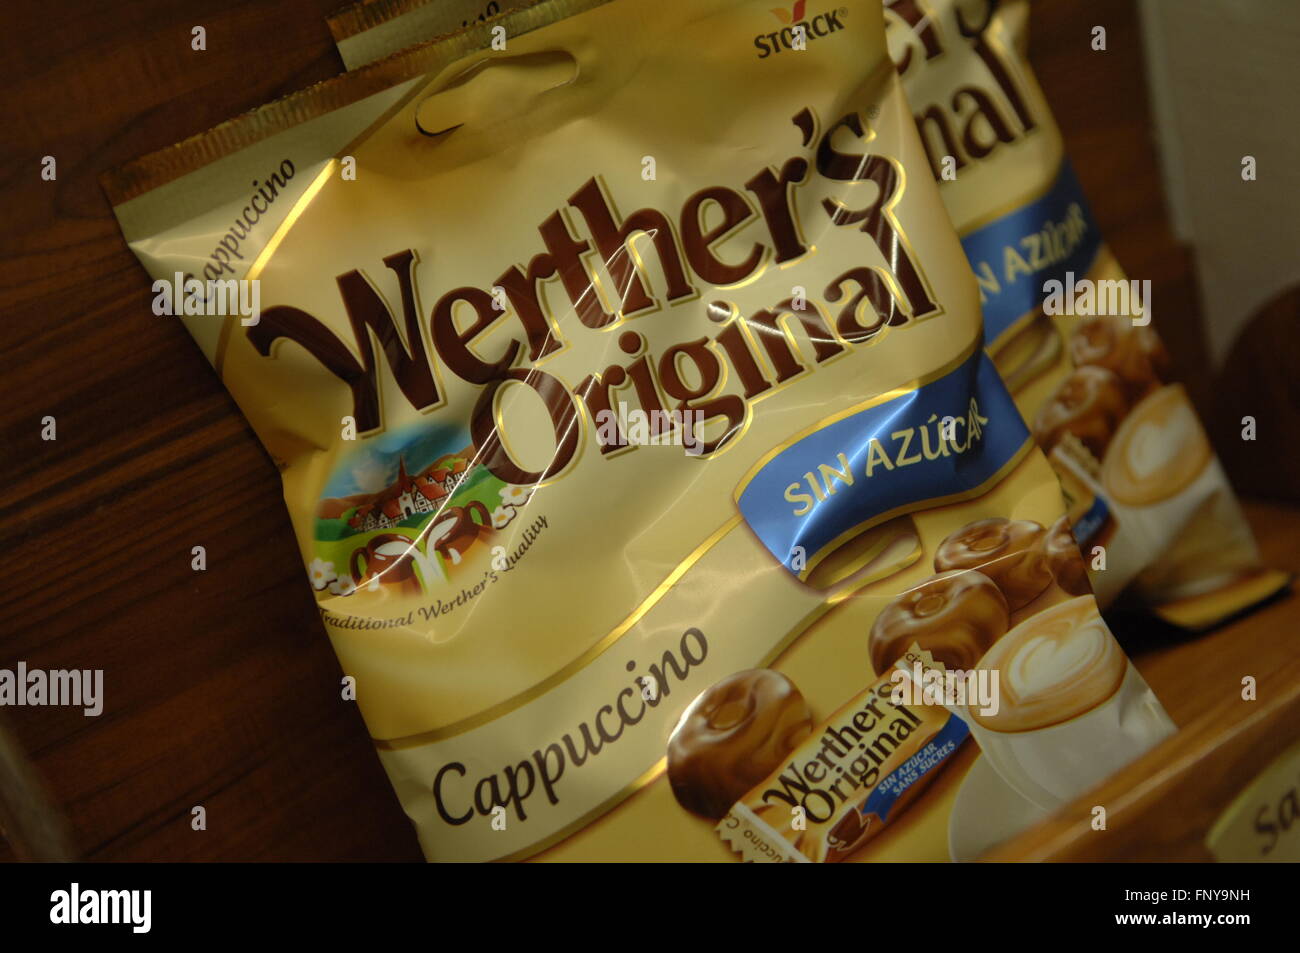 Werther's Original Cappuccino packet of sweets Stock Photo